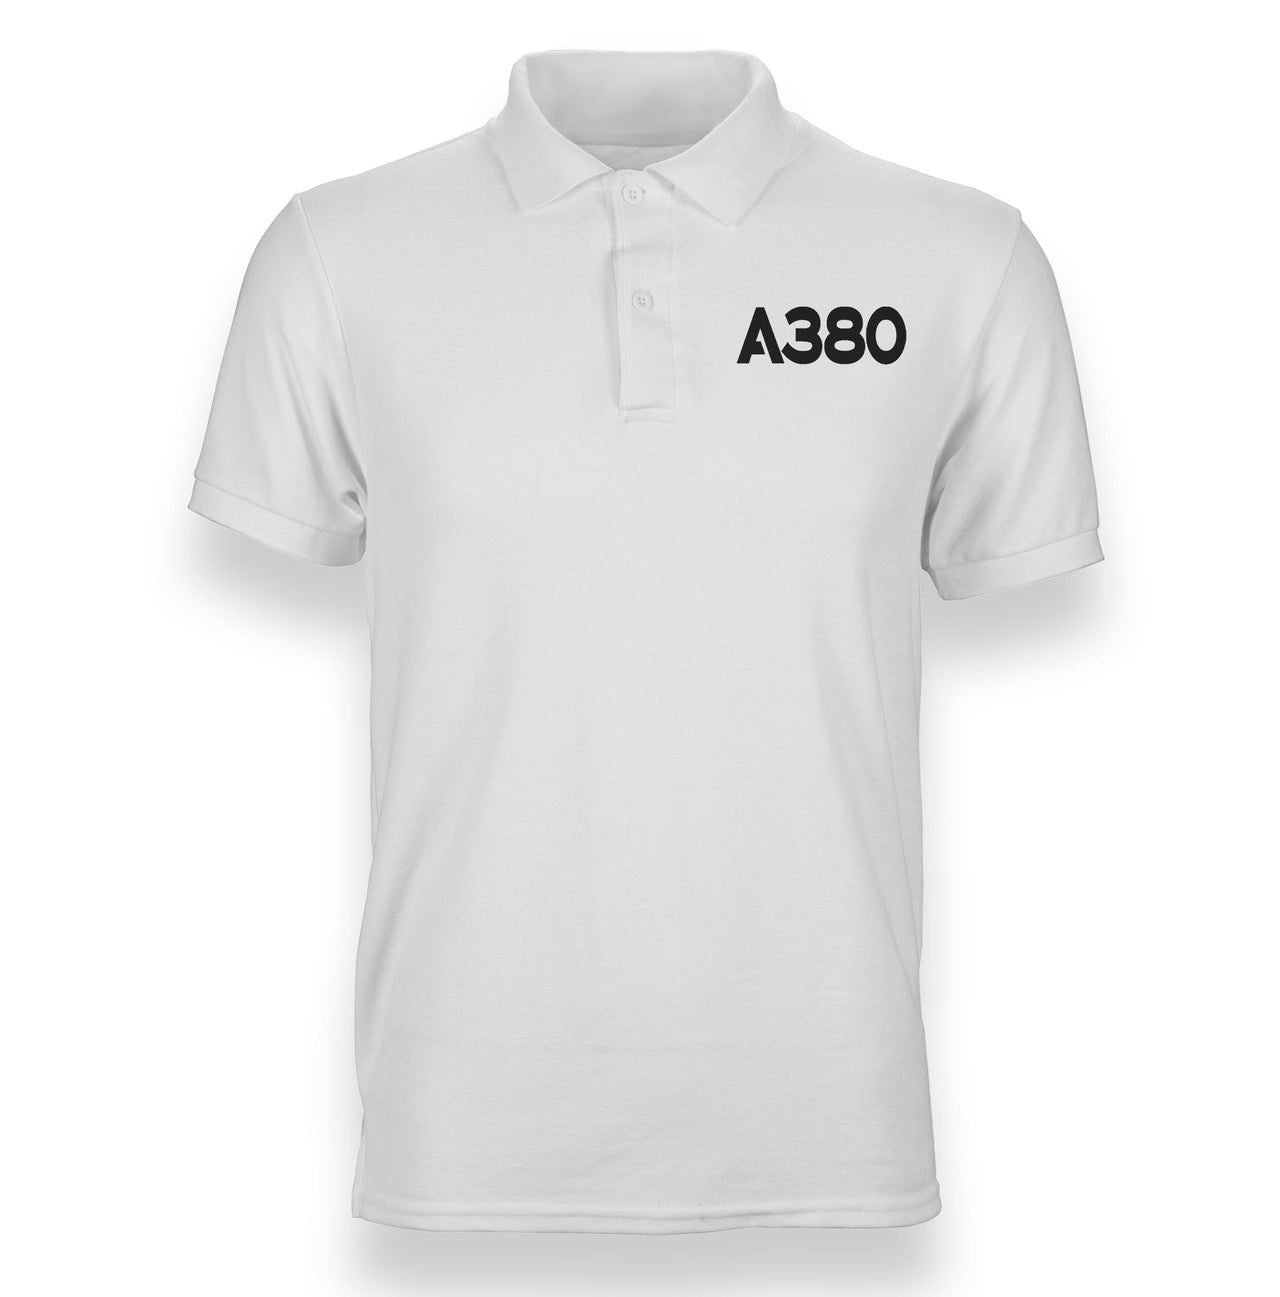 A380 Flat Text Designed Polo T-Shirts